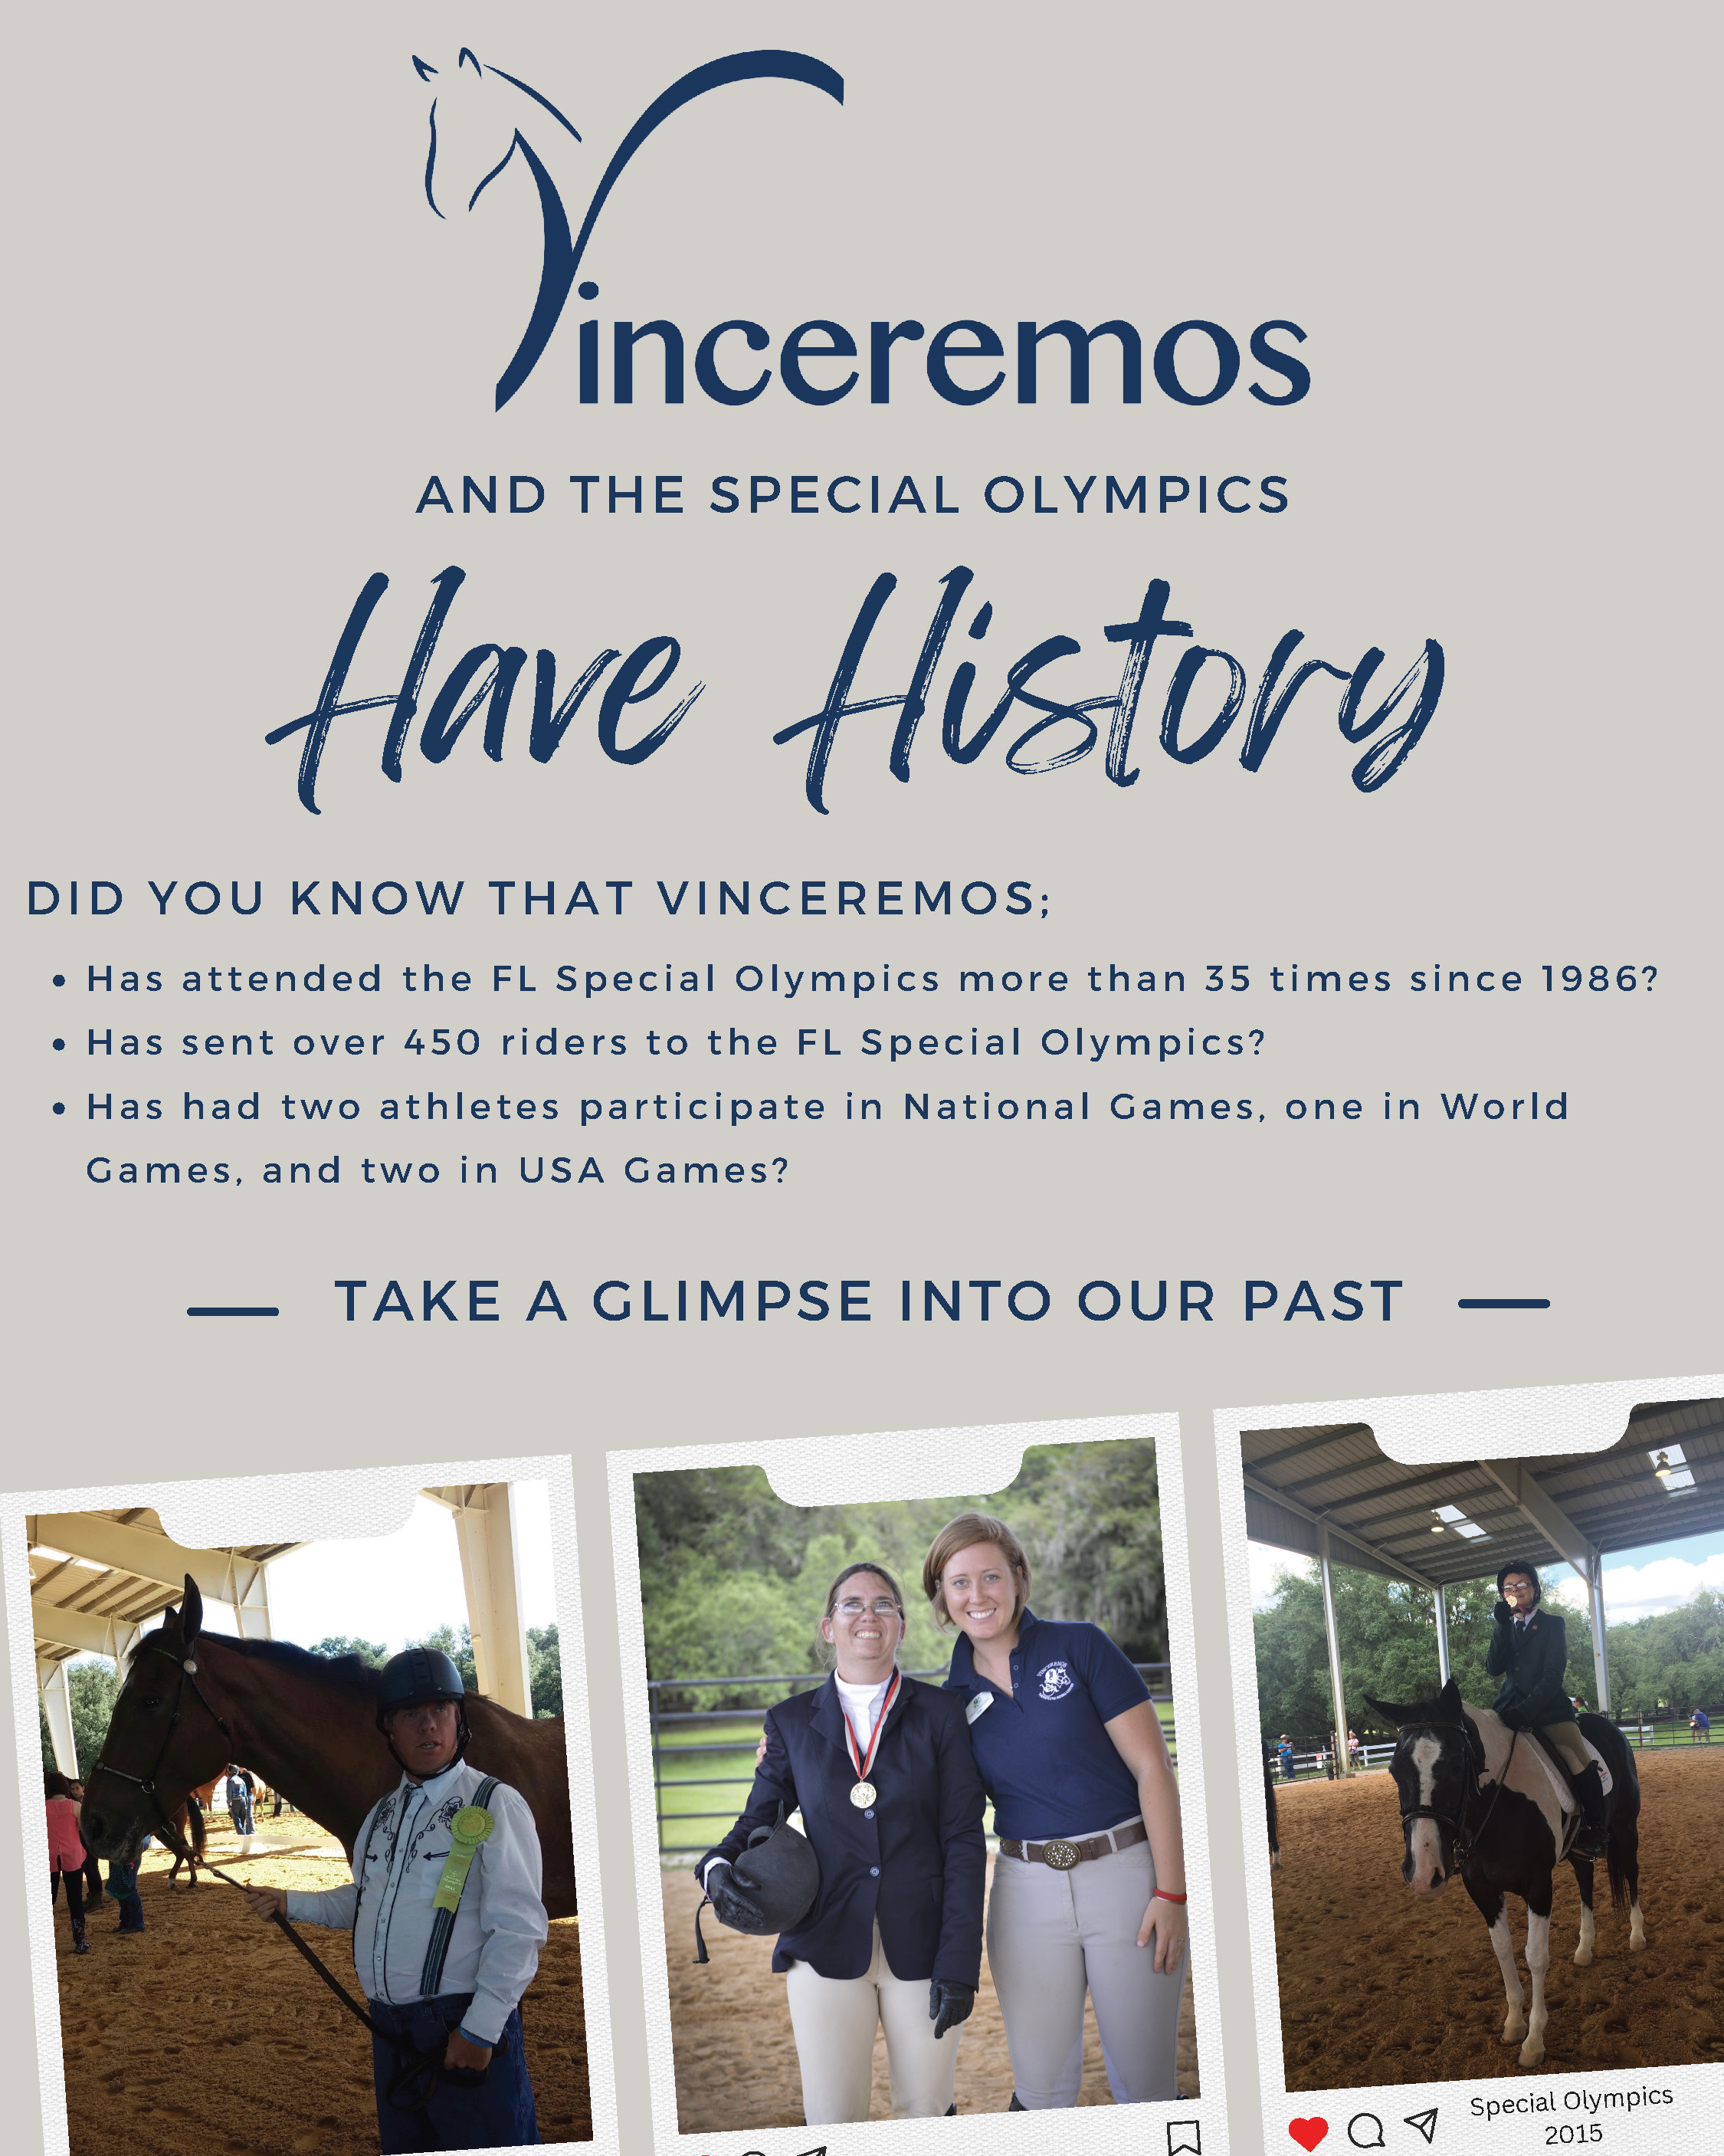 Vinceremos and The Special Olympics Have History